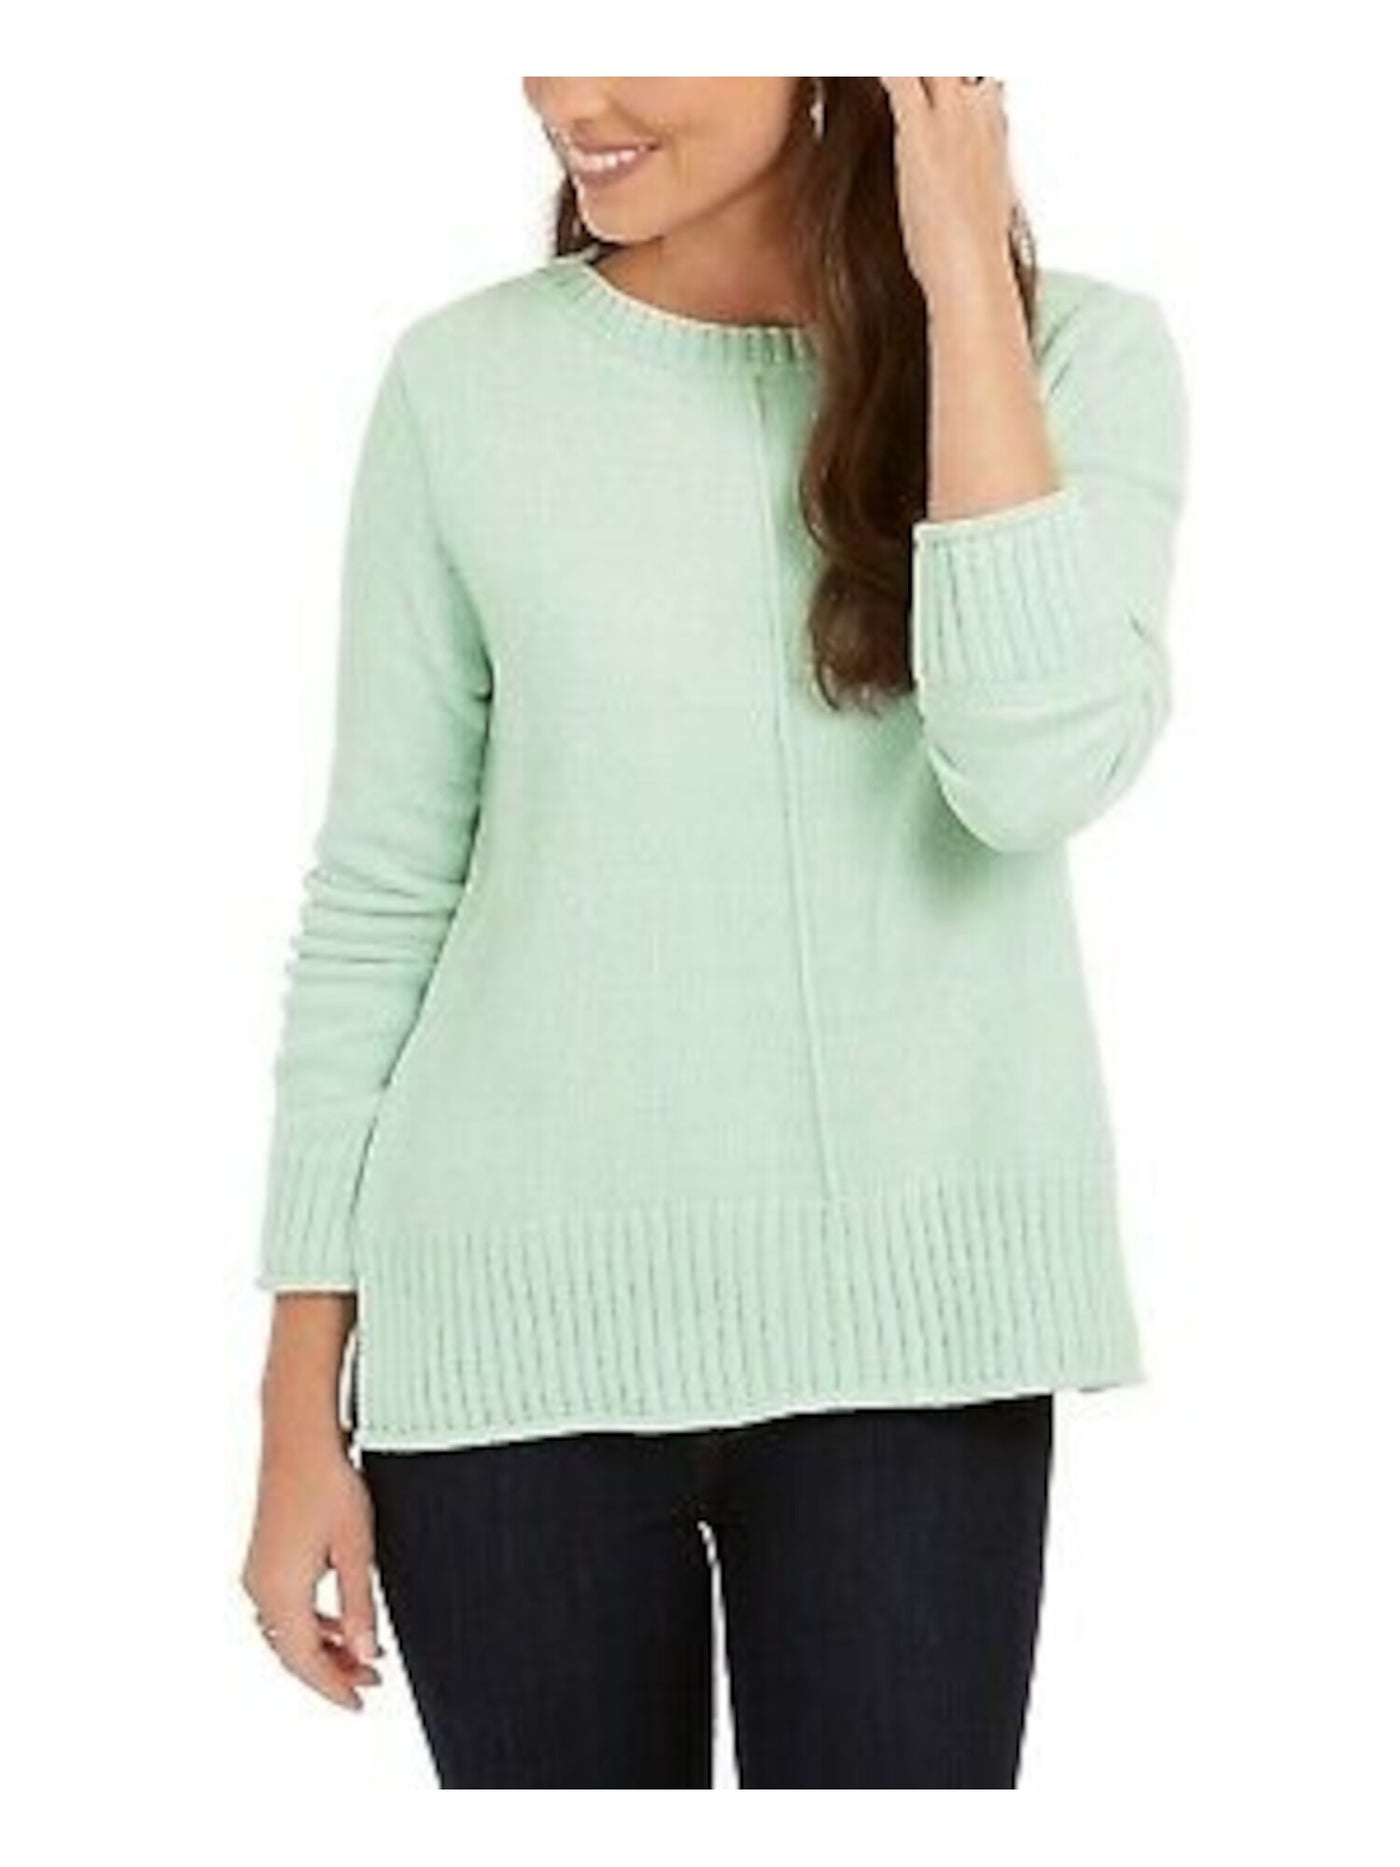 STYLE & COMPANY Womens Green Textured Ribbed 3/4 Sleeve Crew Neck Sweater Petites PXL